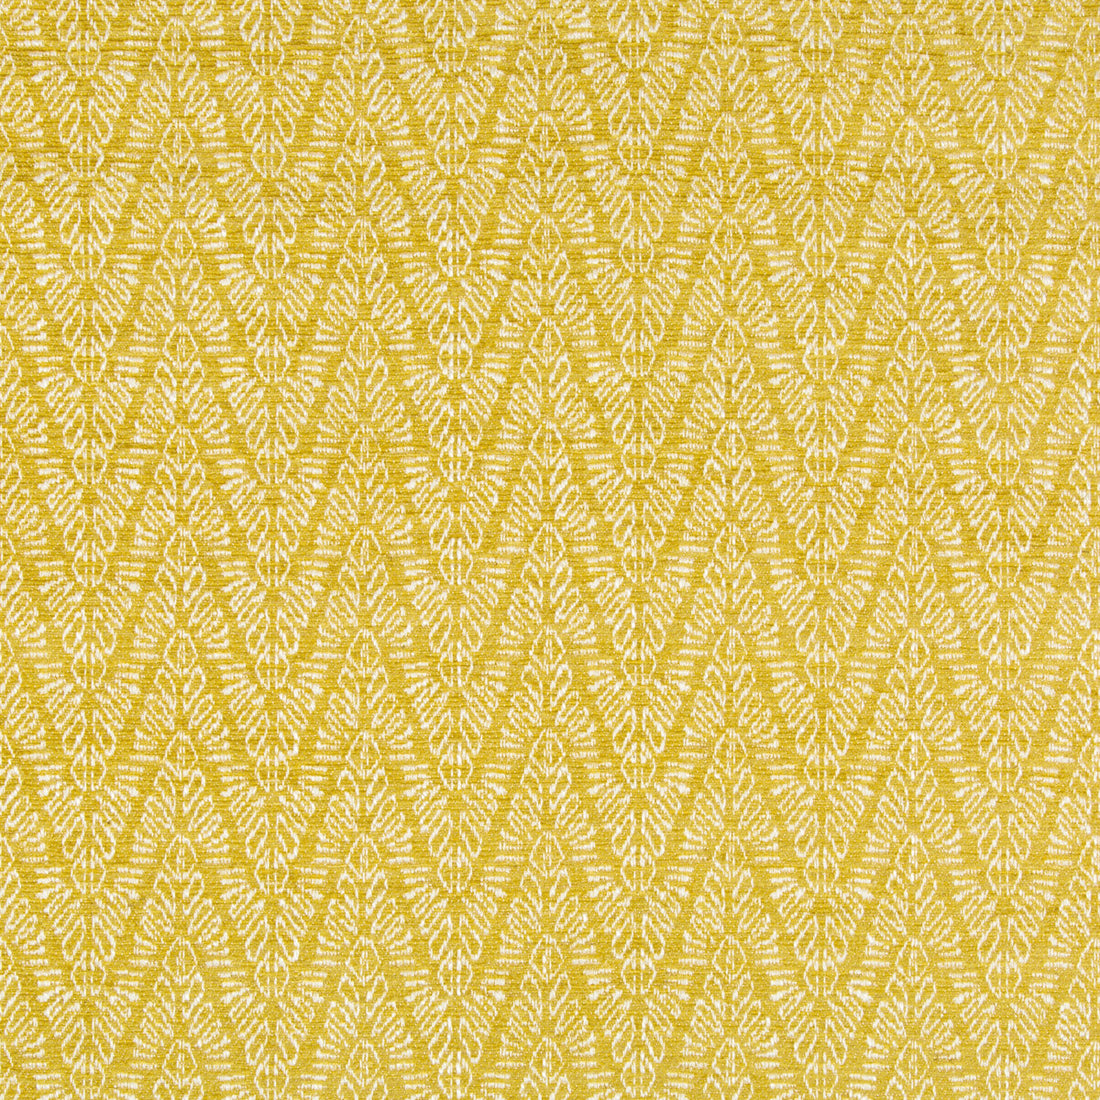 Topaz Weave fabric in chartreuse color - pattern GWF-3750.404.0 - by Lee Jofa Modern in the Gems collection